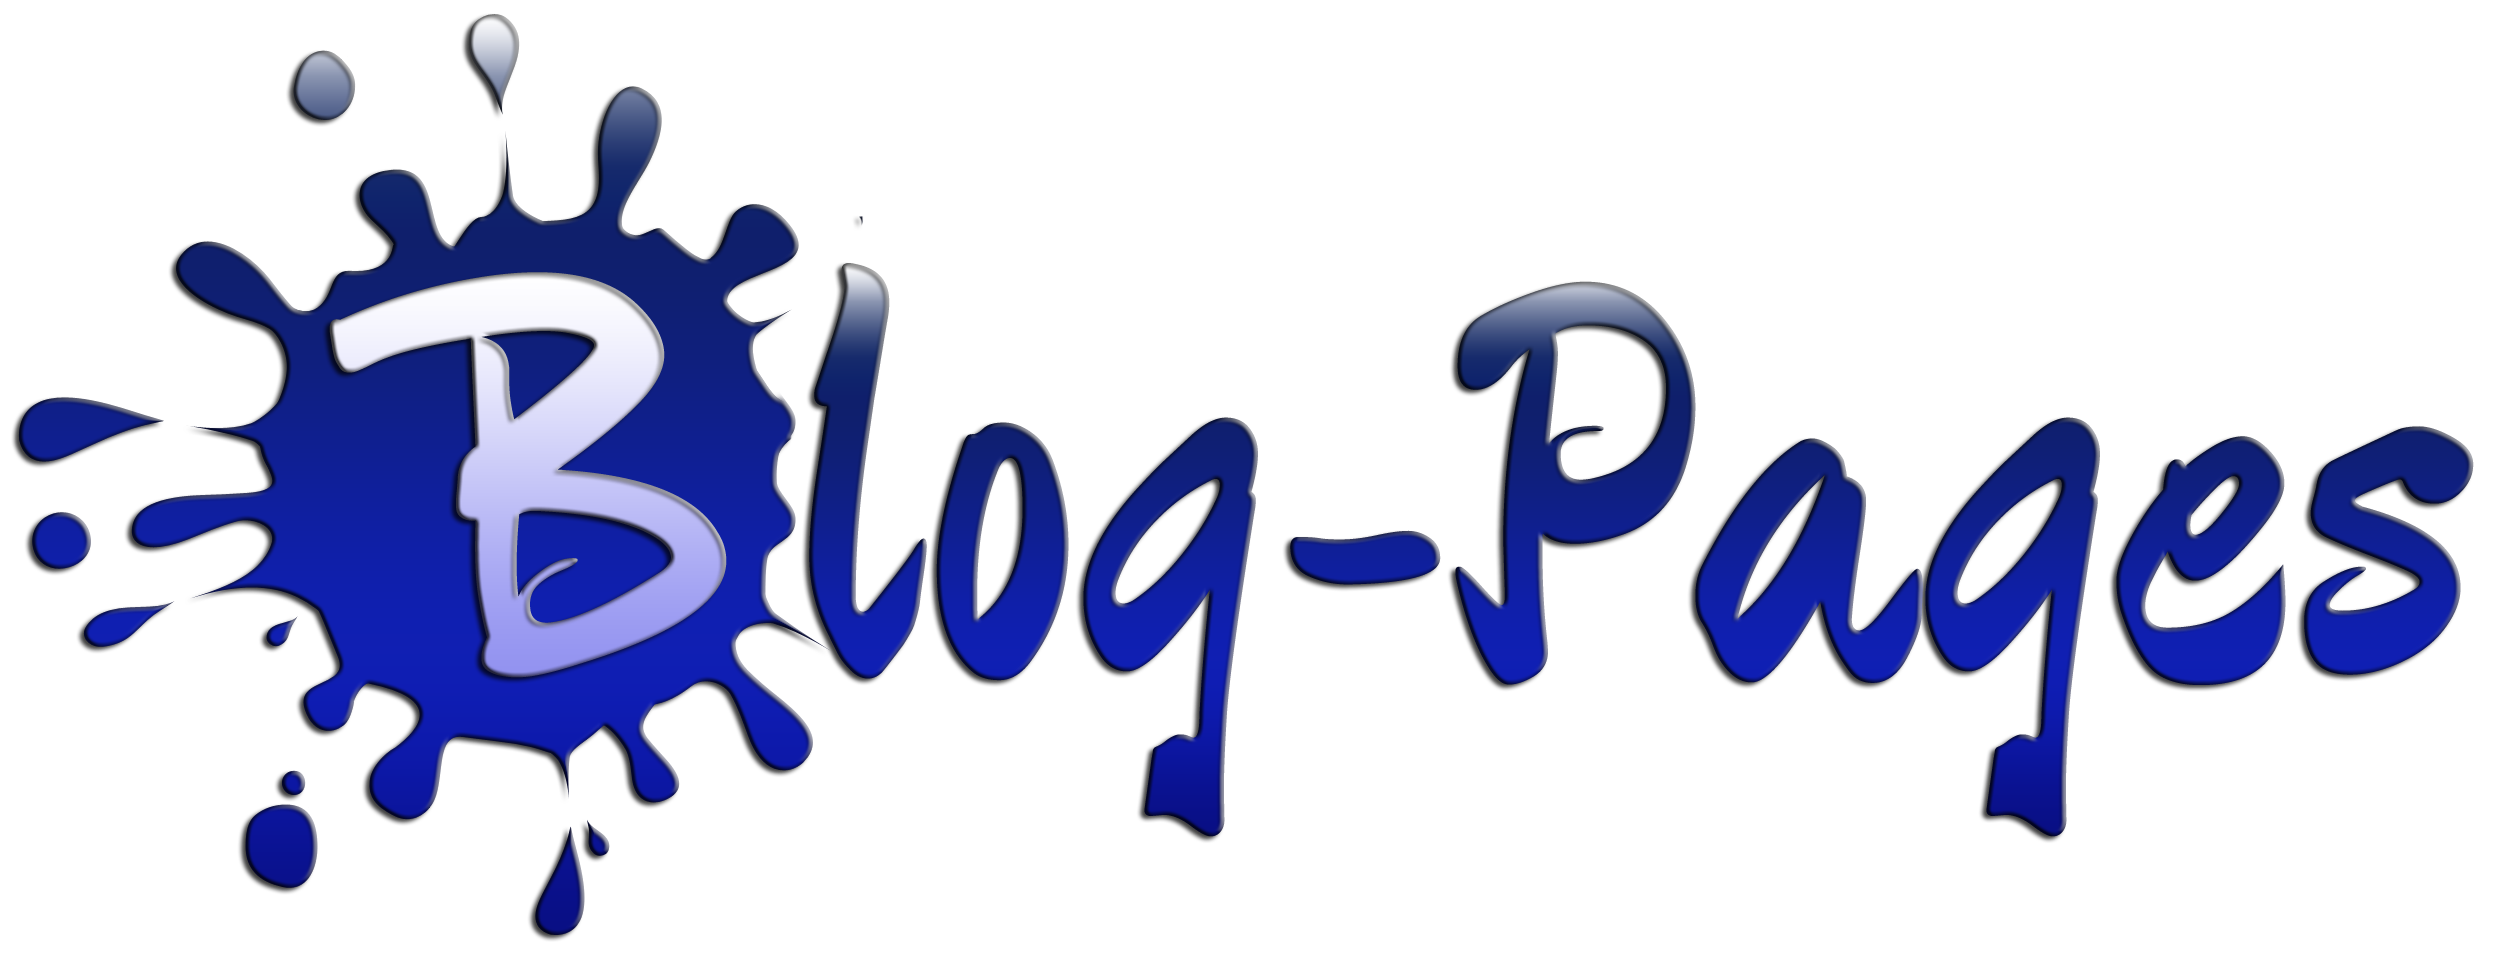 Blog-Pages.co.uk